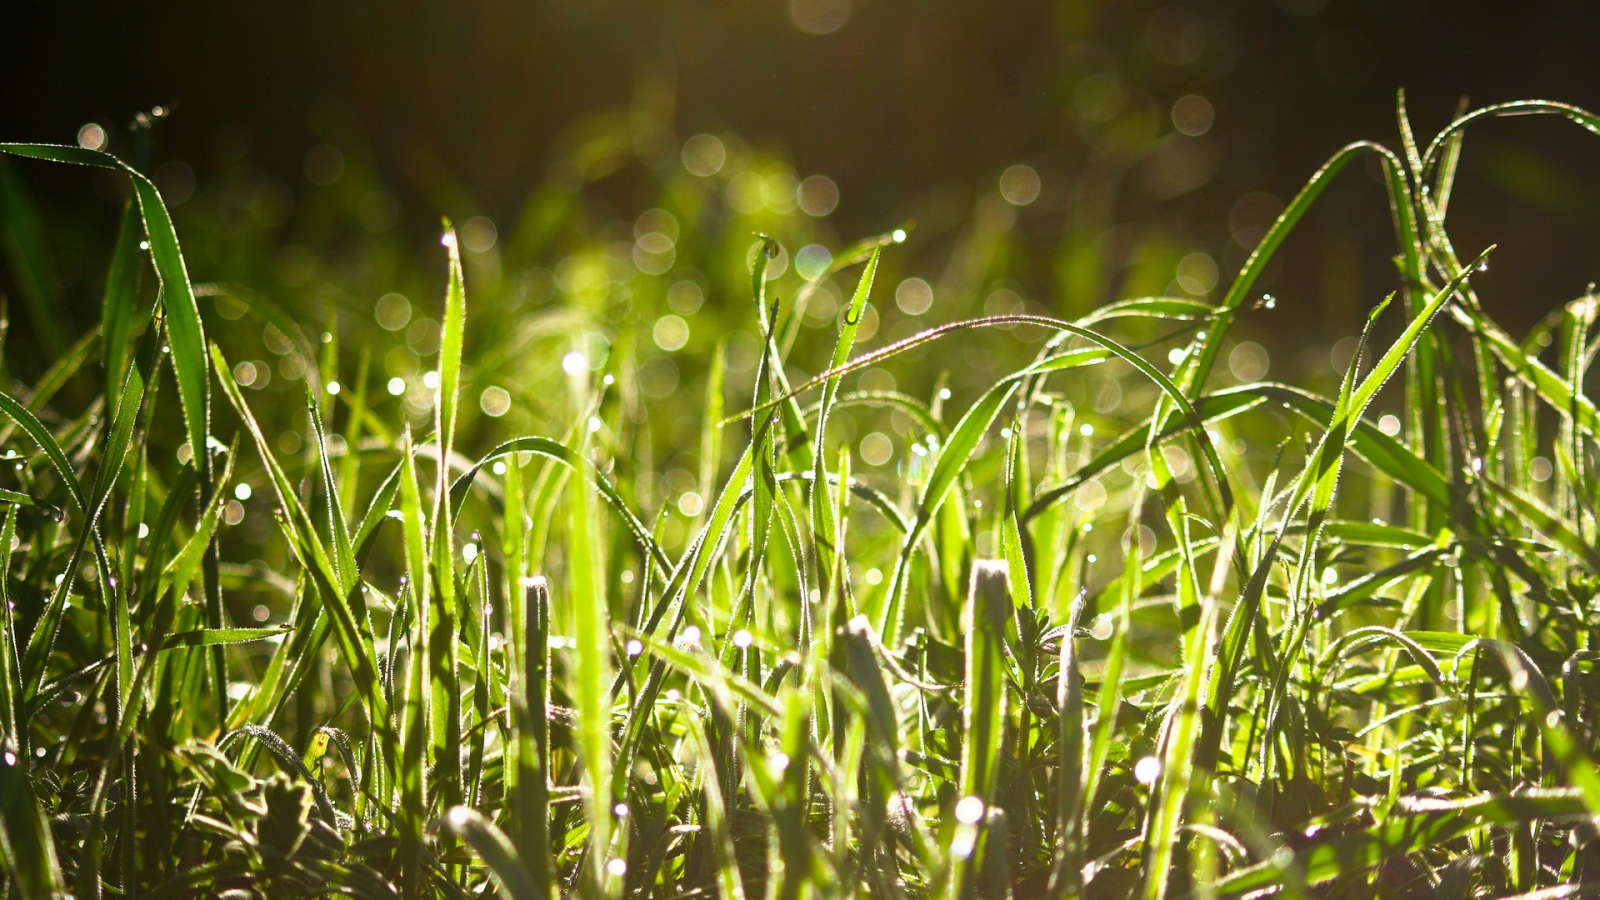 Wet Grass In The Sun  for 1600 x 900 HDTV resolution